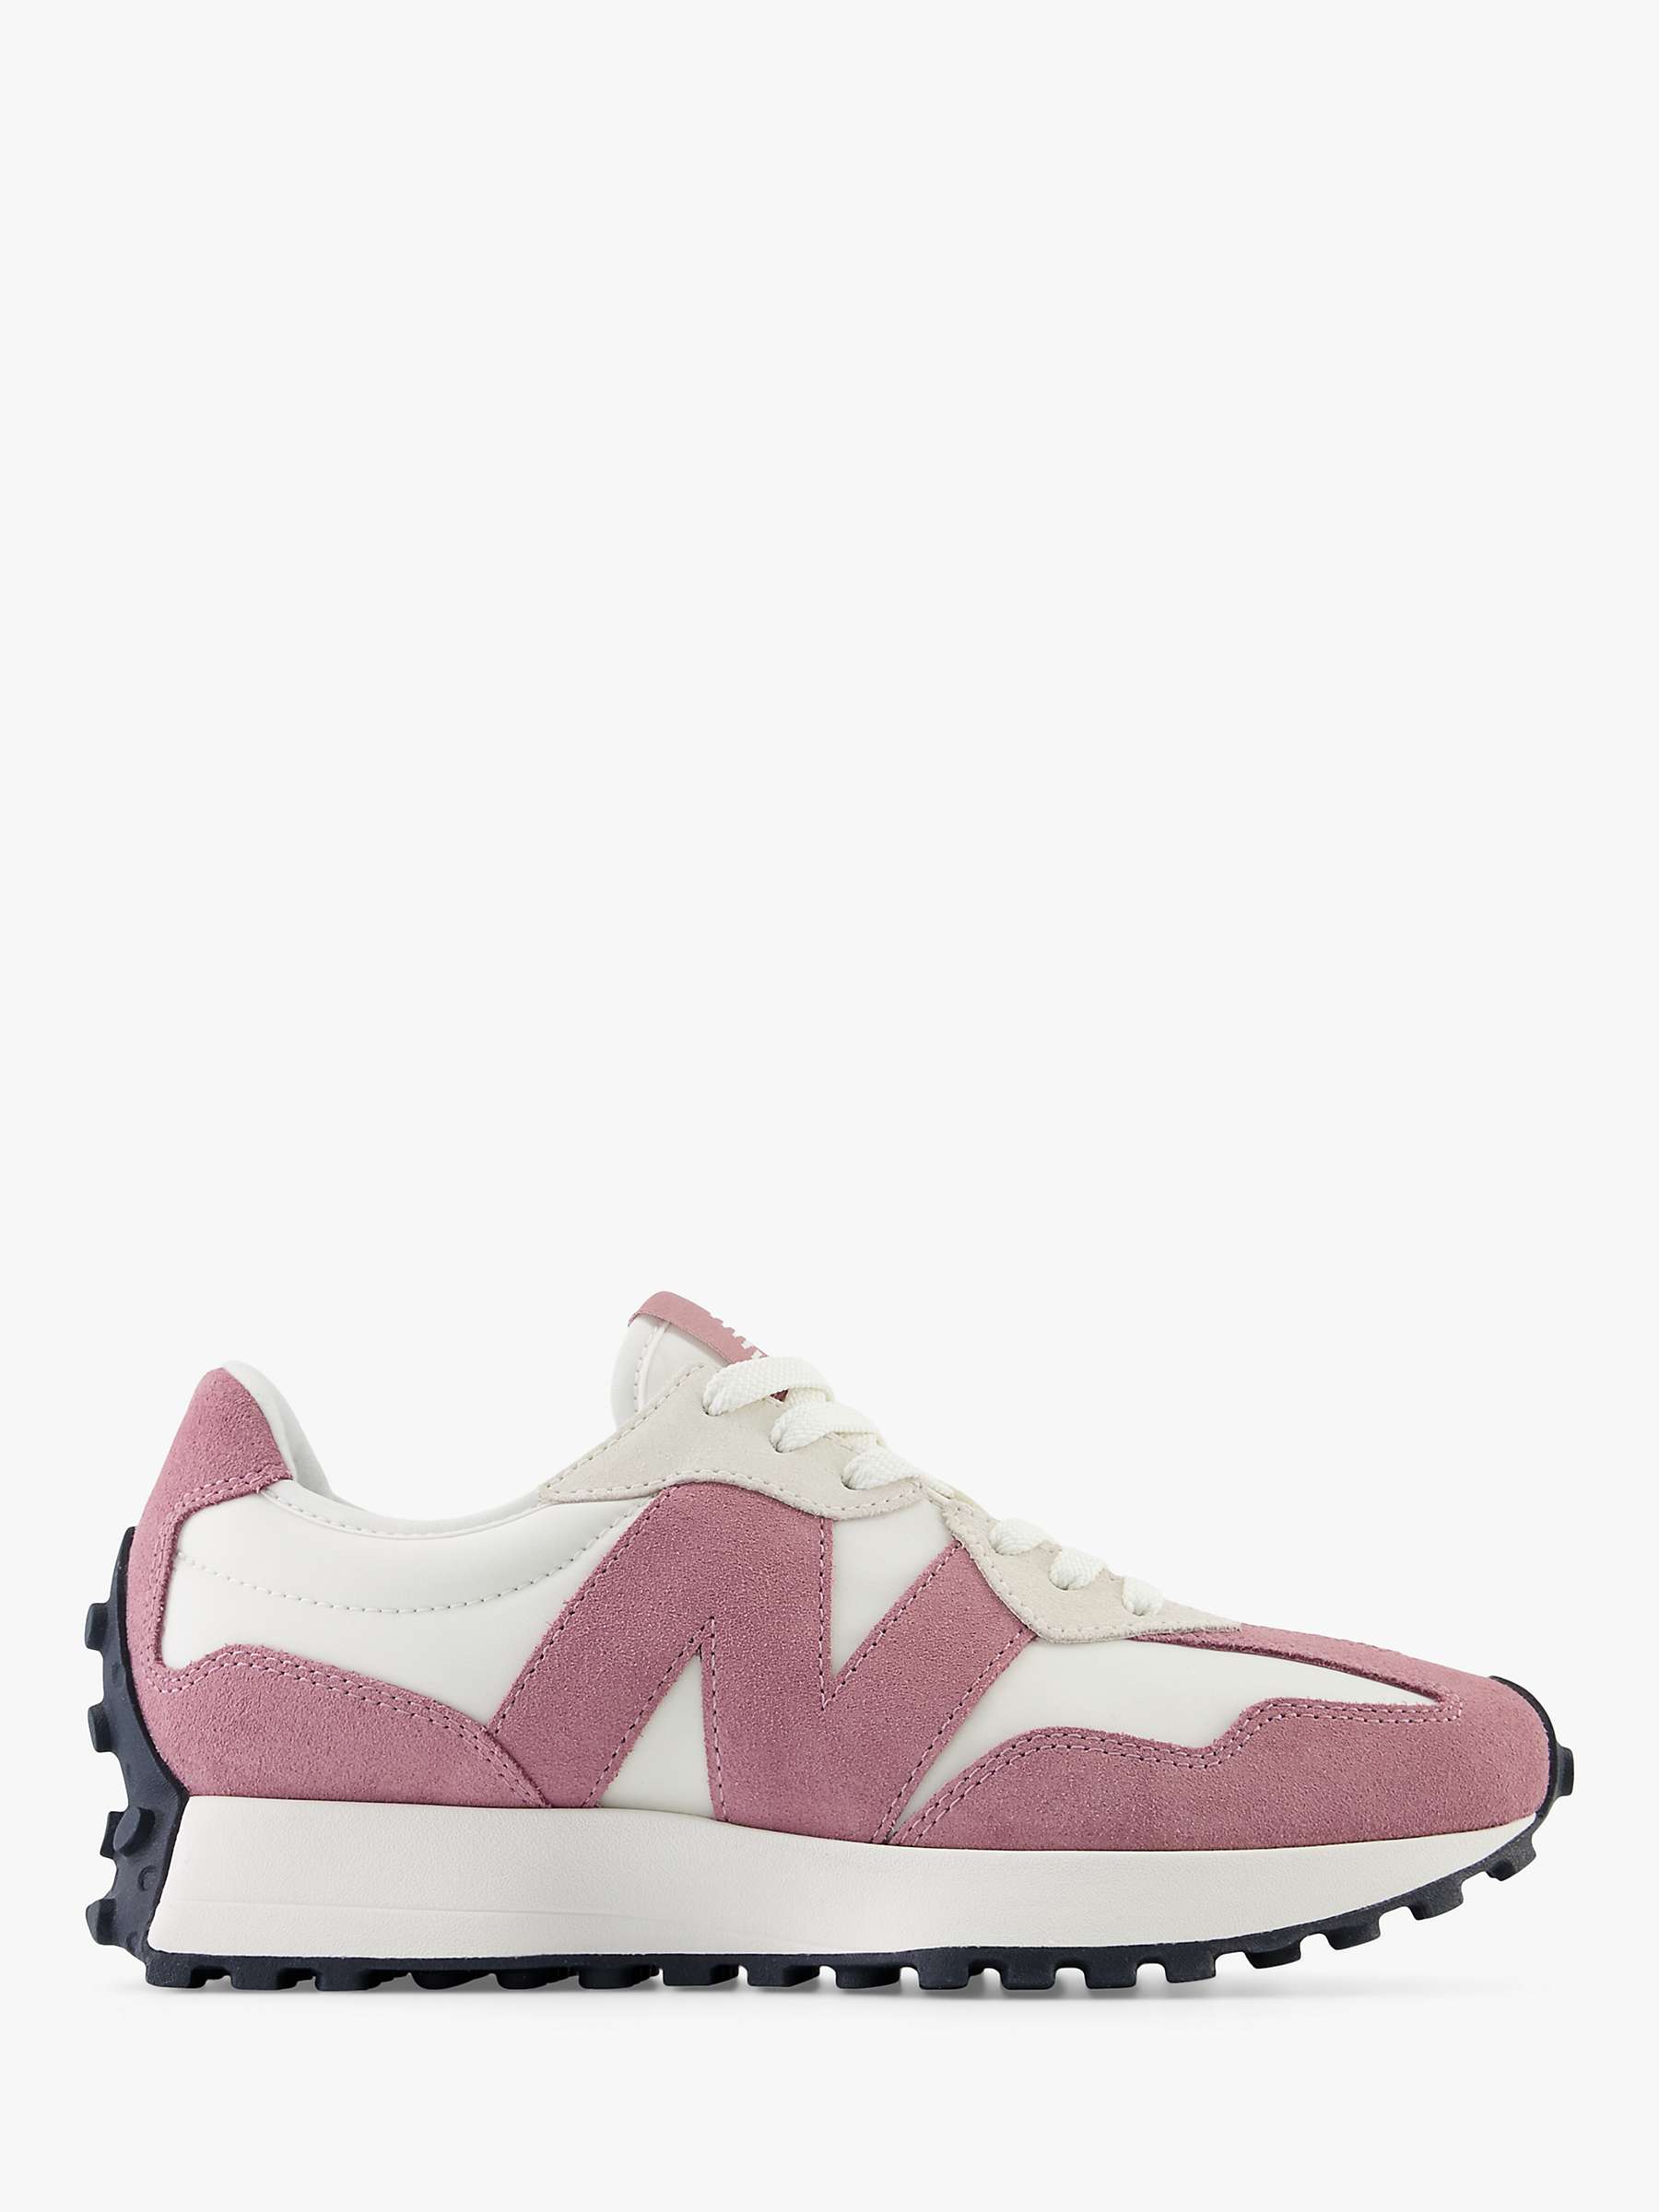 Buy New Balance 327 Trainers Online at johnlewis.com